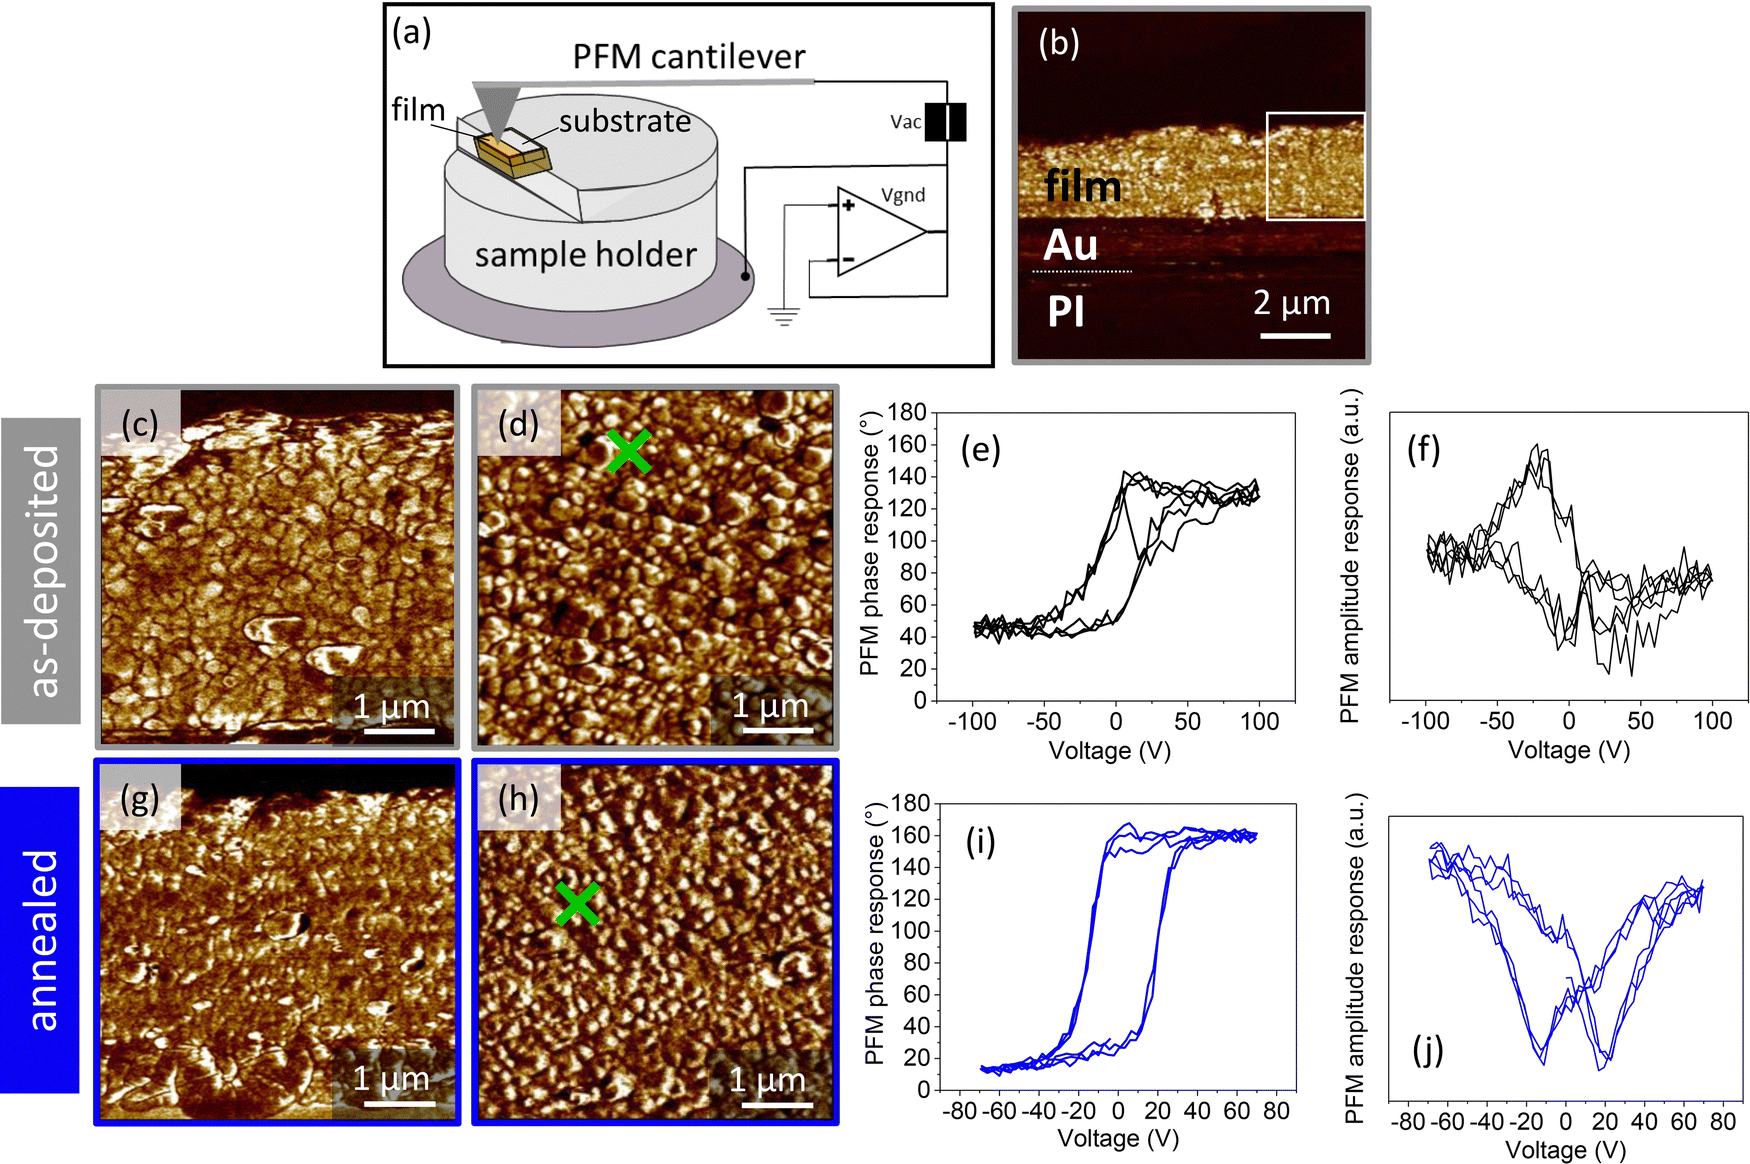 Multifunctional flexible ferroelectric thick-film structures with energy  storage, piezoelectric and electrocaloric performance - Journal of  Materials Chemistry C (RSC Publishing) DOI:10.1039/D3TC01555F